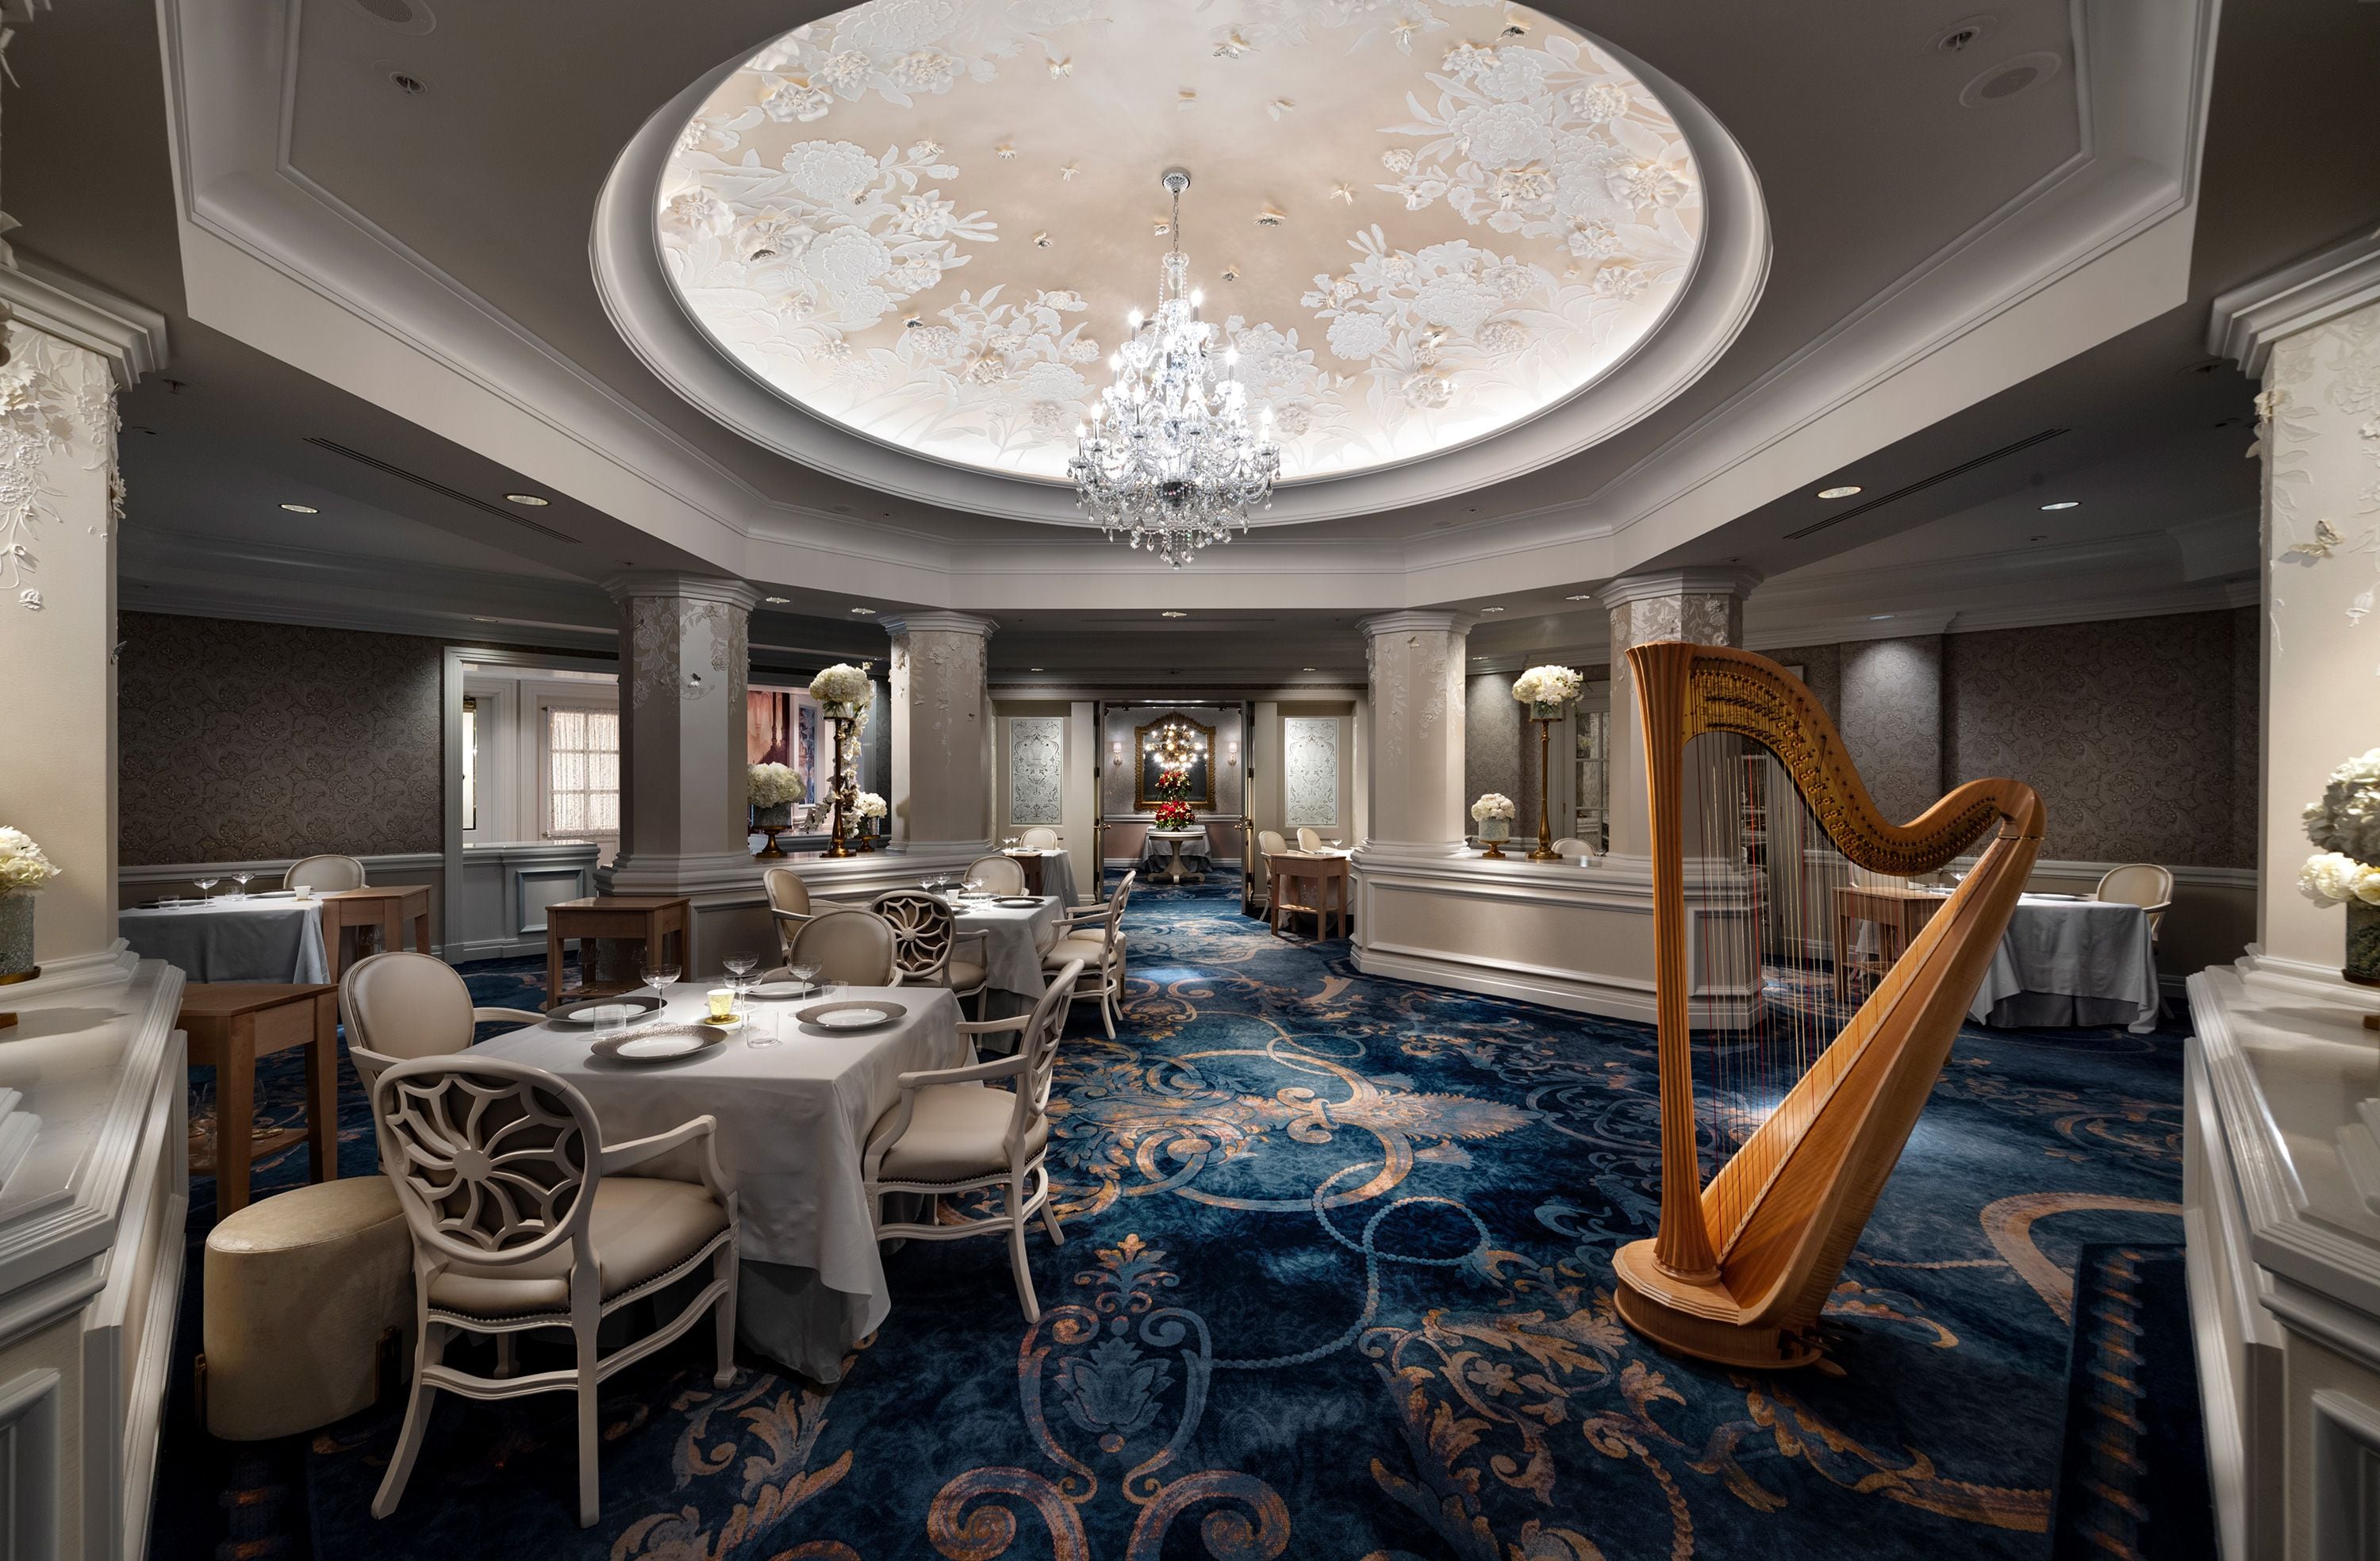 First look at Grand Floridian’s refurbished Victoria & Albert’s restaurant